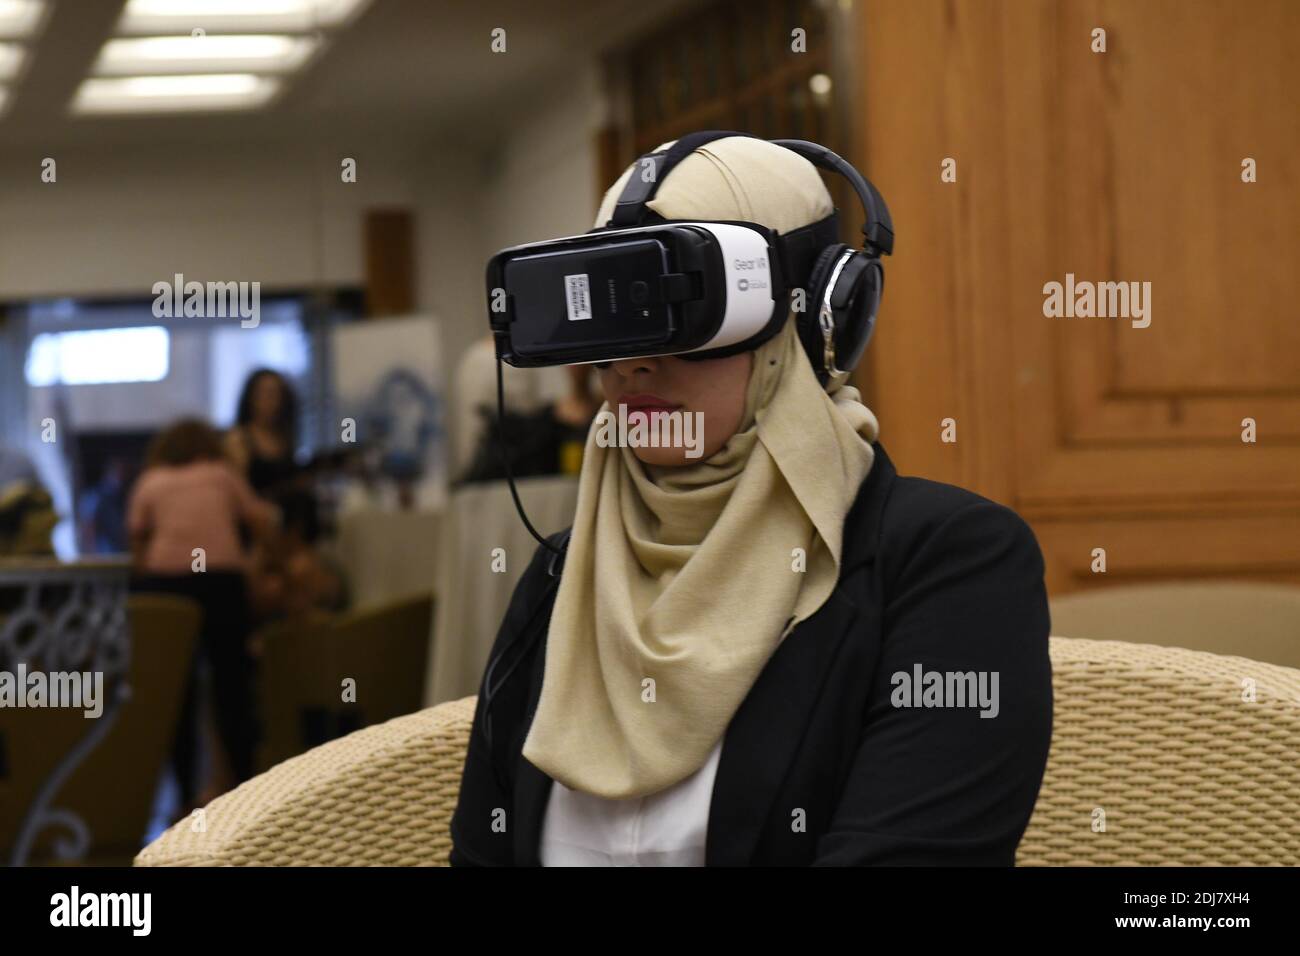 A VR or Virtual Reality experience showing scenes from Aleppo and other  cities in Syria under shelling takes place at hotel Riviera in Beirut,  Lebanon on August 15, 2016. The experience is